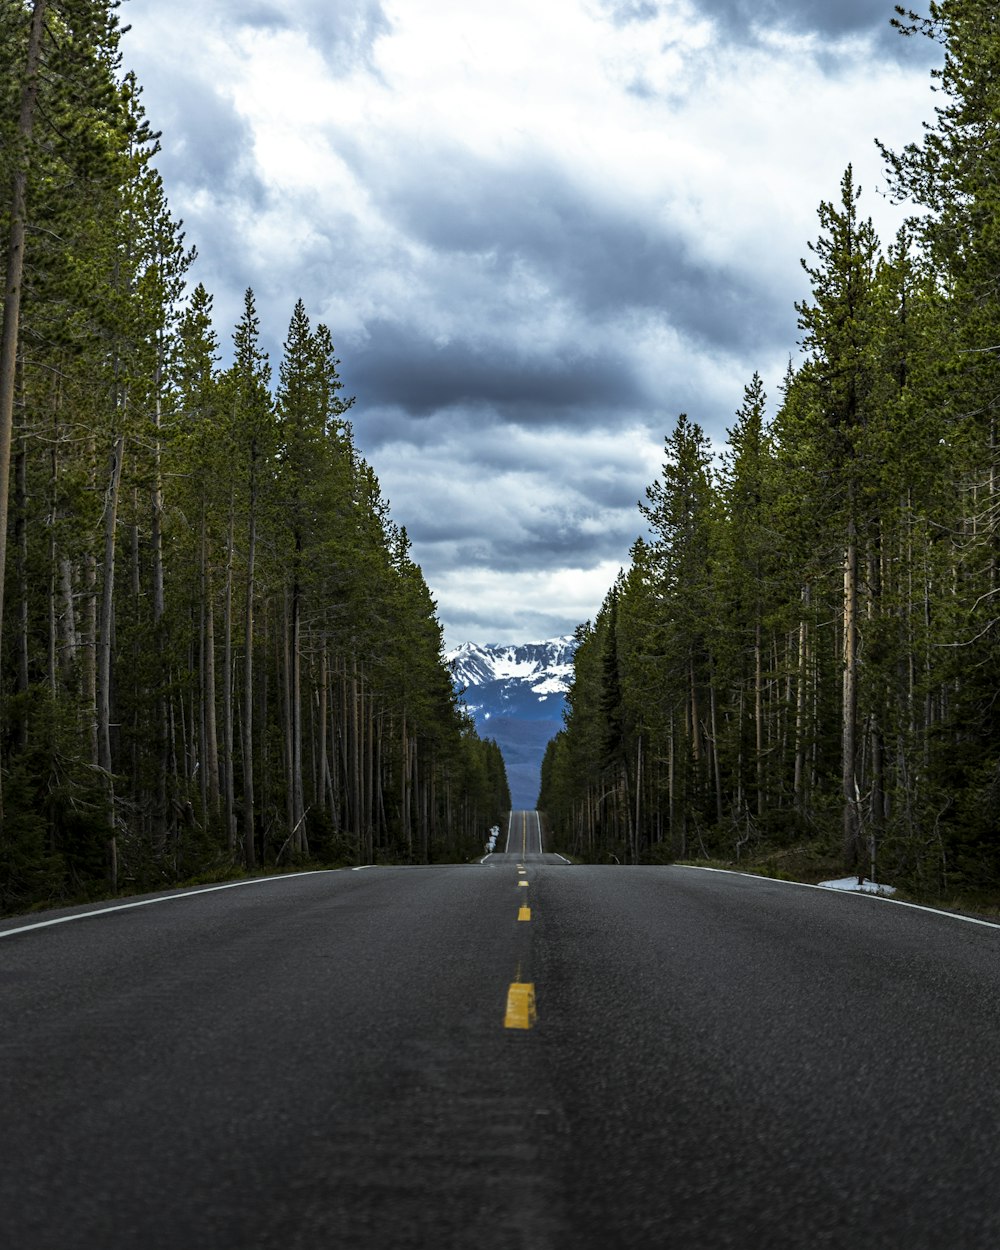 gray asphalt road between green trees under gray cloudy sky during daytime